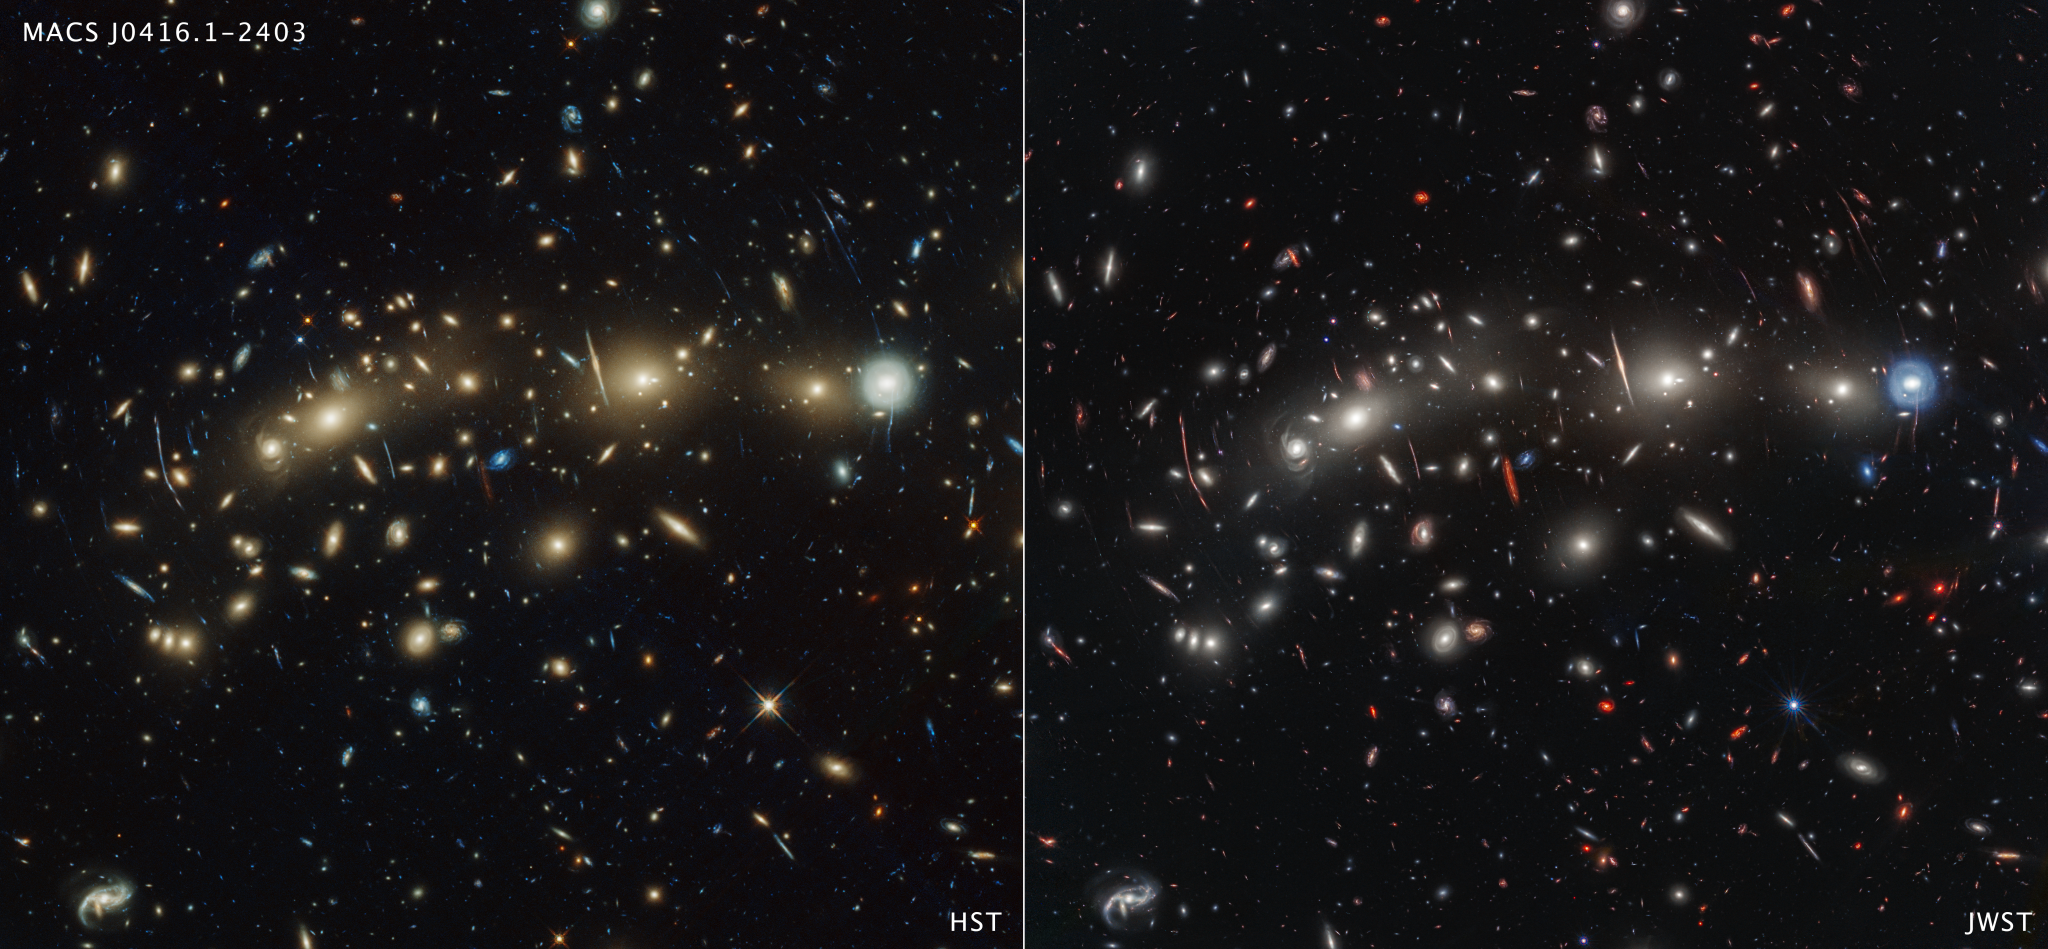 Two side-by-side photos of the same region of space. The left image is labeled “HST” and the right image “JWST.” A variety of galaxies of various shapes are scattered across the image, making it feel densely populated. The JWST image contains a number of red galaxies that are invisible or only barely visible in the HST image.